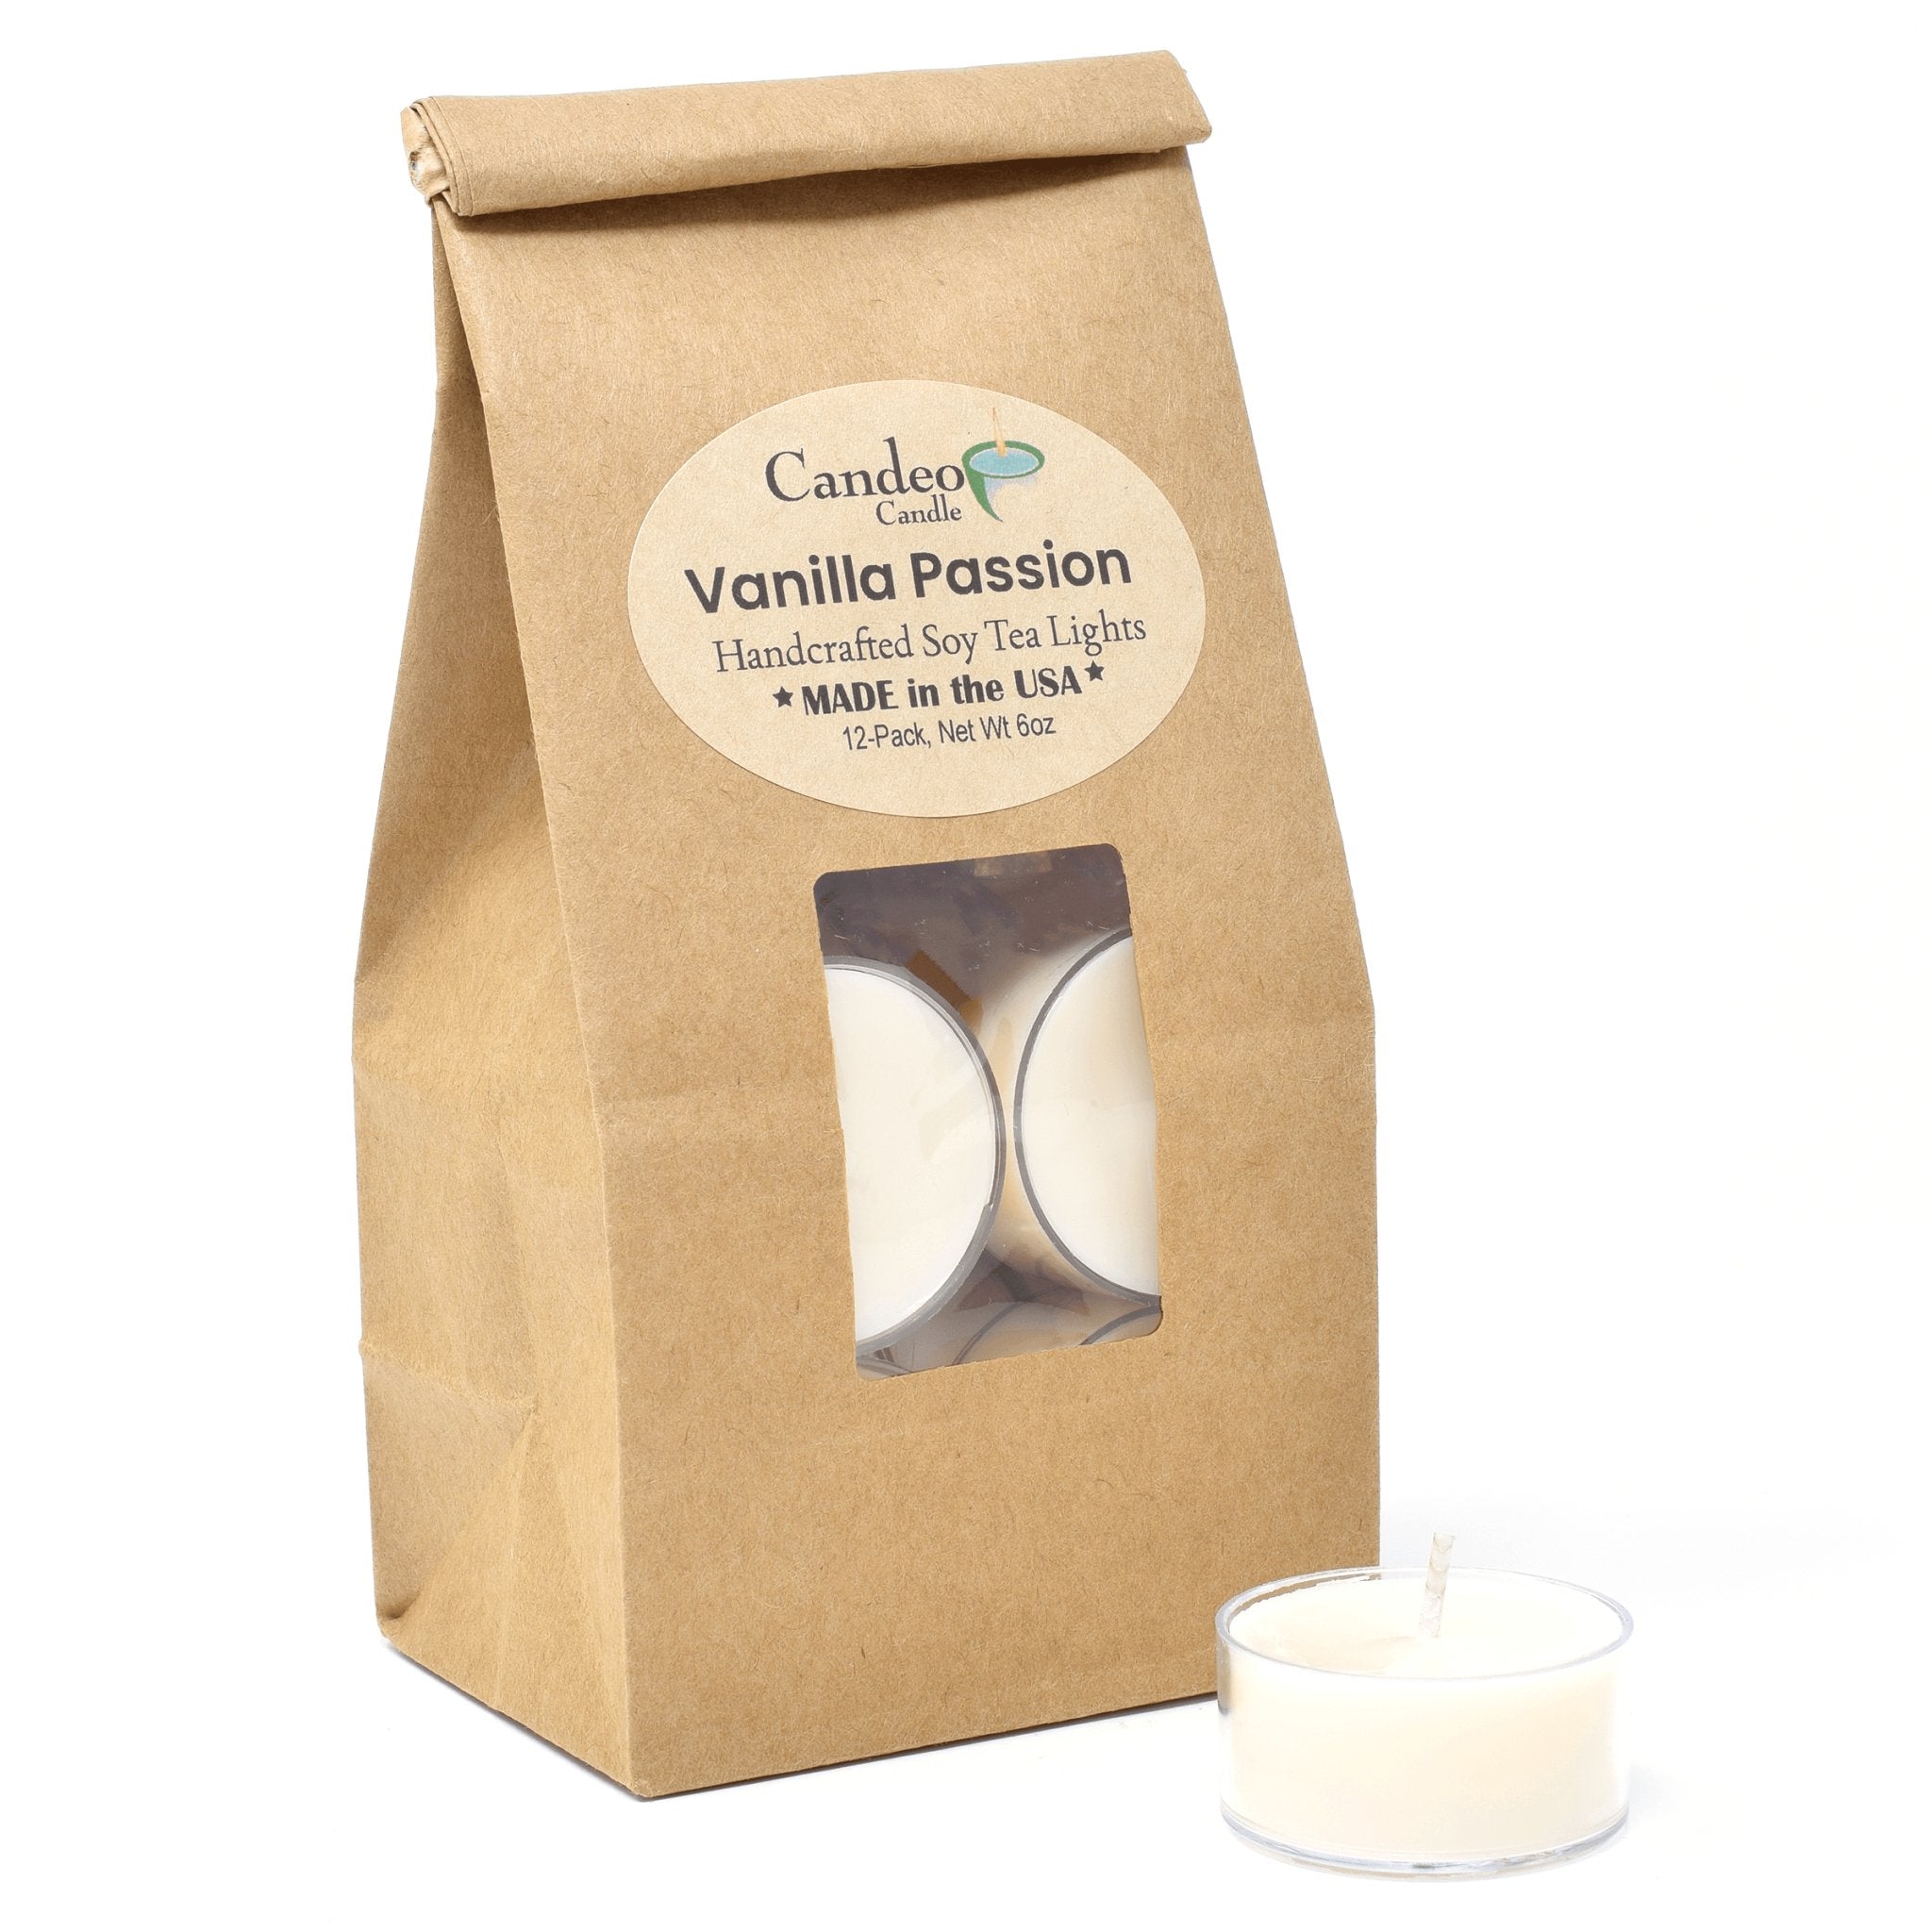 Vanilla Passion, Soy Tea Light 12-Pack - Candeo Candle